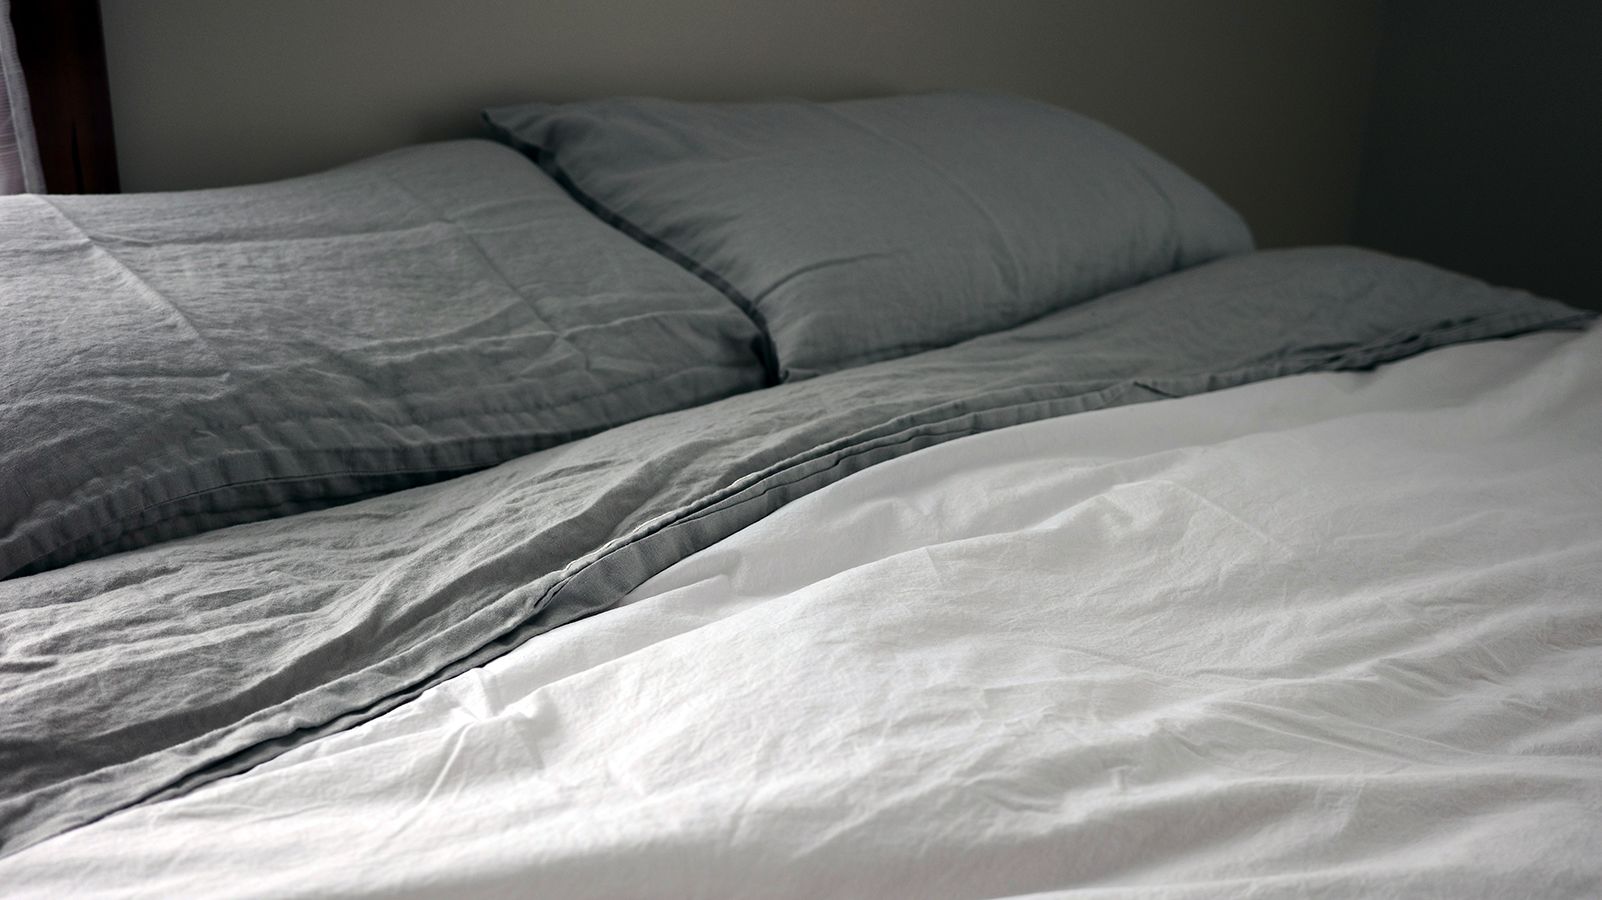 For comfy sleeping, should you buy cotton or linen sheets? - Reviewed